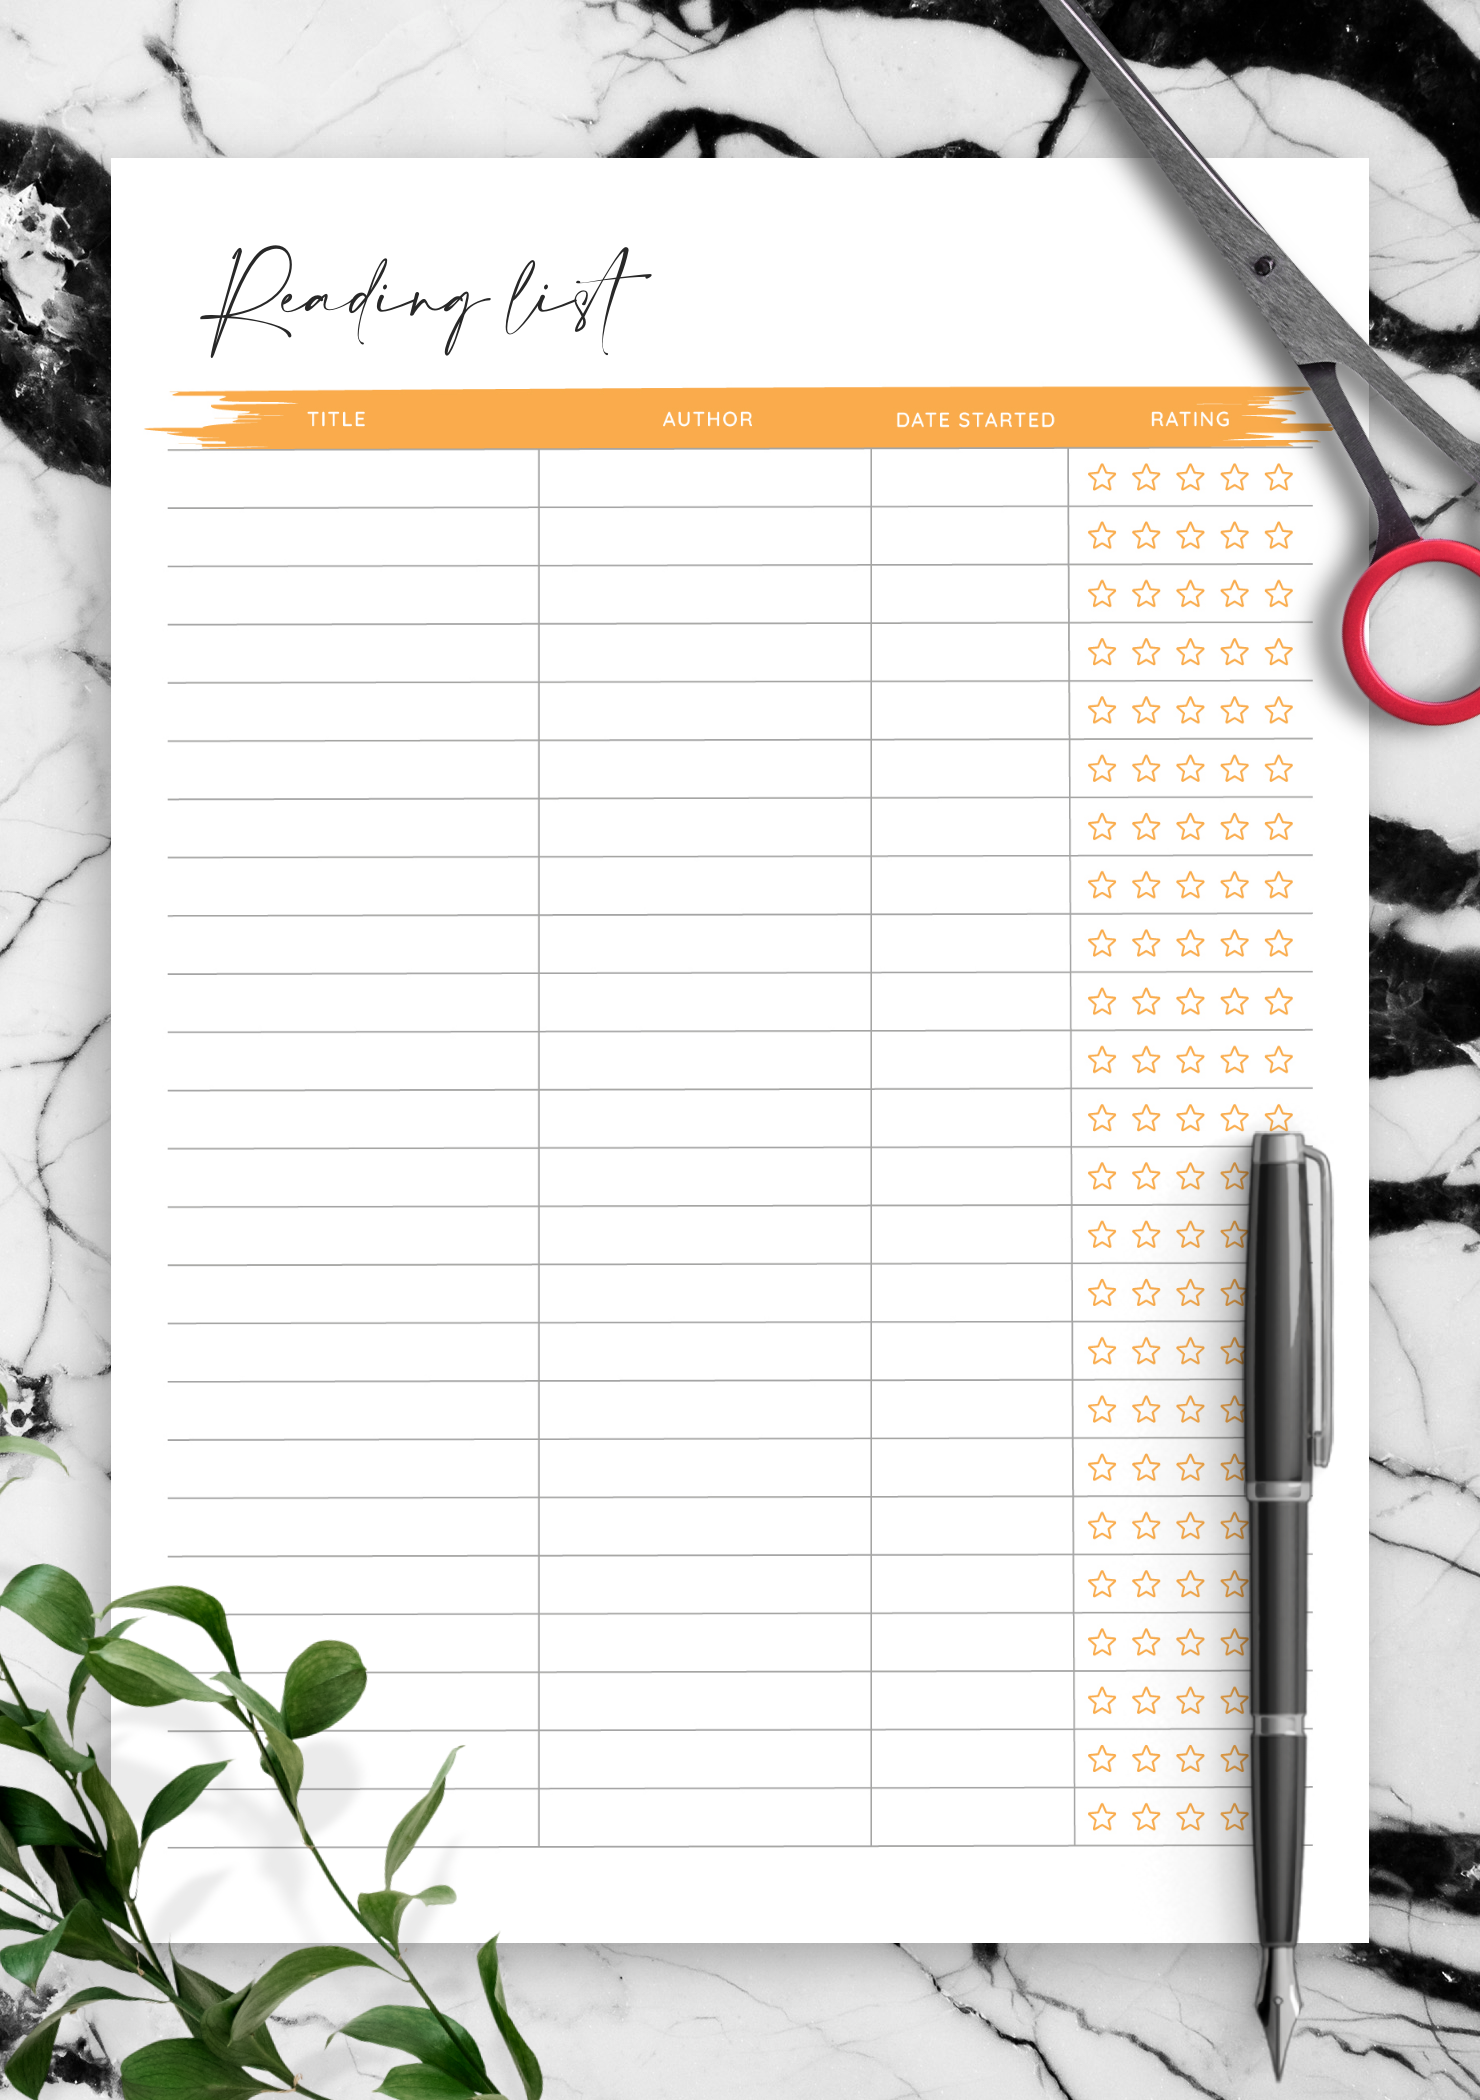 download-printable-reading-list-template-with-rating-stars-pdf